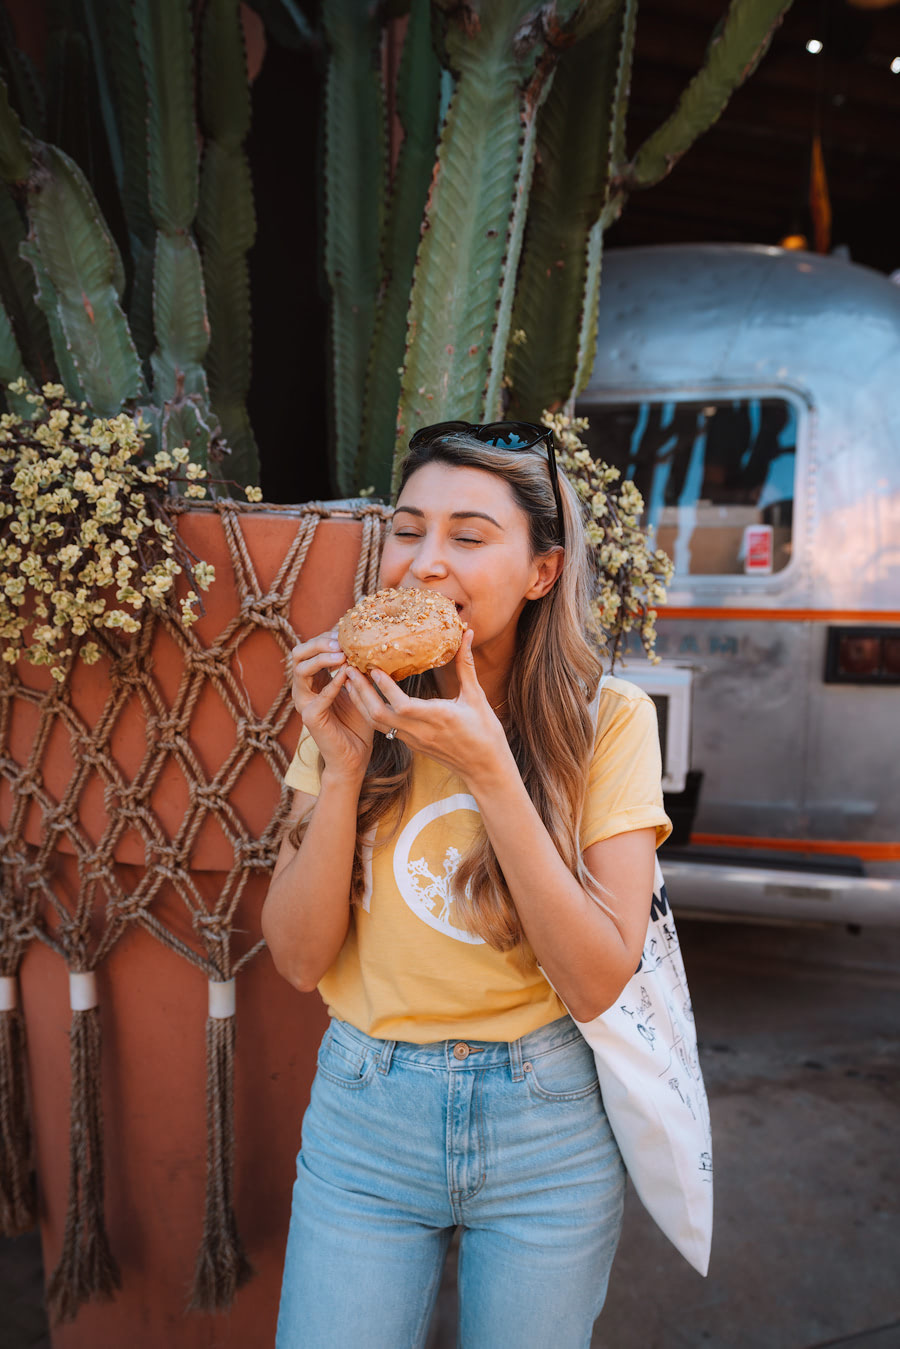 Orange County Travel Guide Everything You Need to Know- Costa Mesa The Lab Good Time Doughnuts